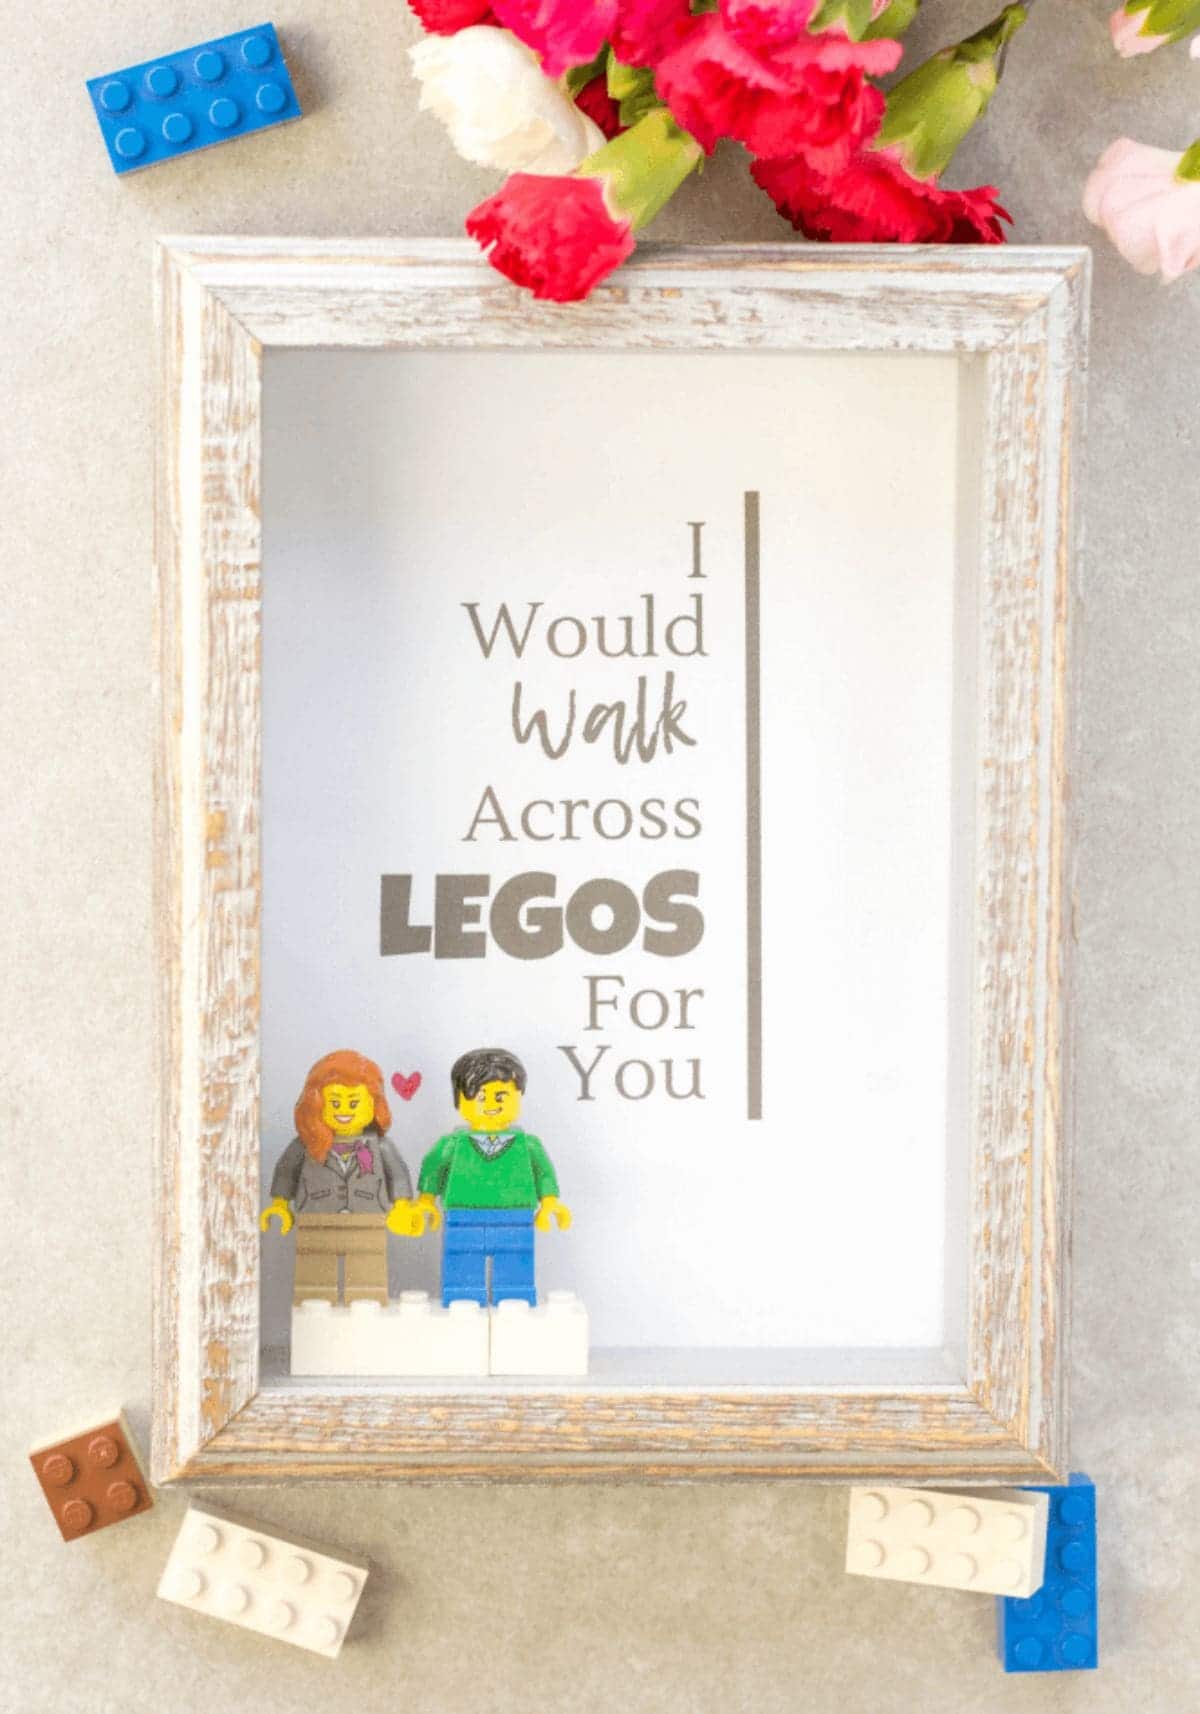 Against a cream background wit hlego pieces scattered around it is a whit wooden box frame. Inside are a male and female lego figure. Above them is the text "I would walk across legos for you"